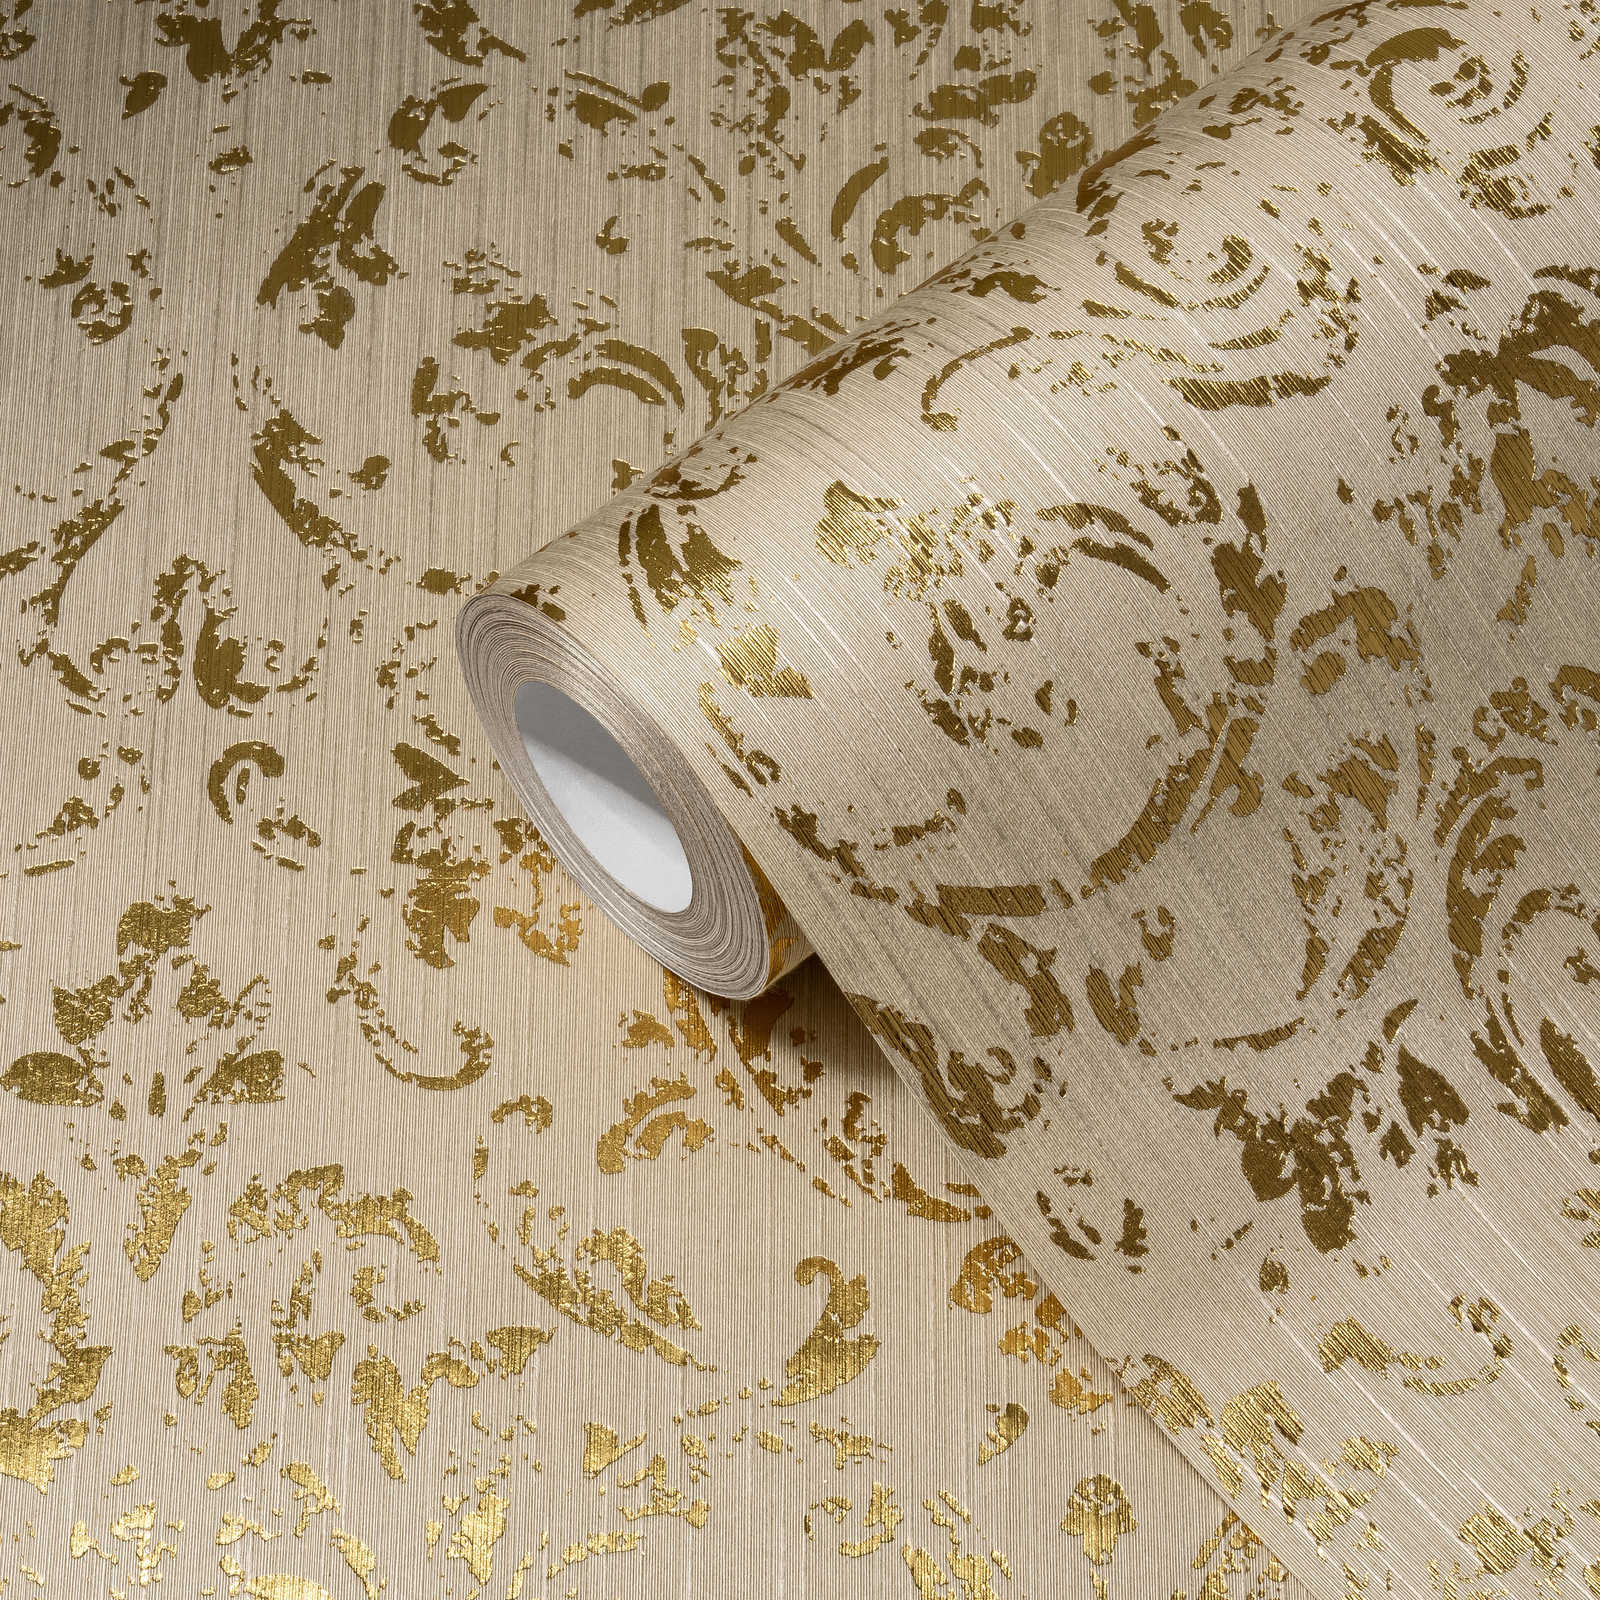             Ornament wallpaper in used look with metallic effect - beige, gold
        